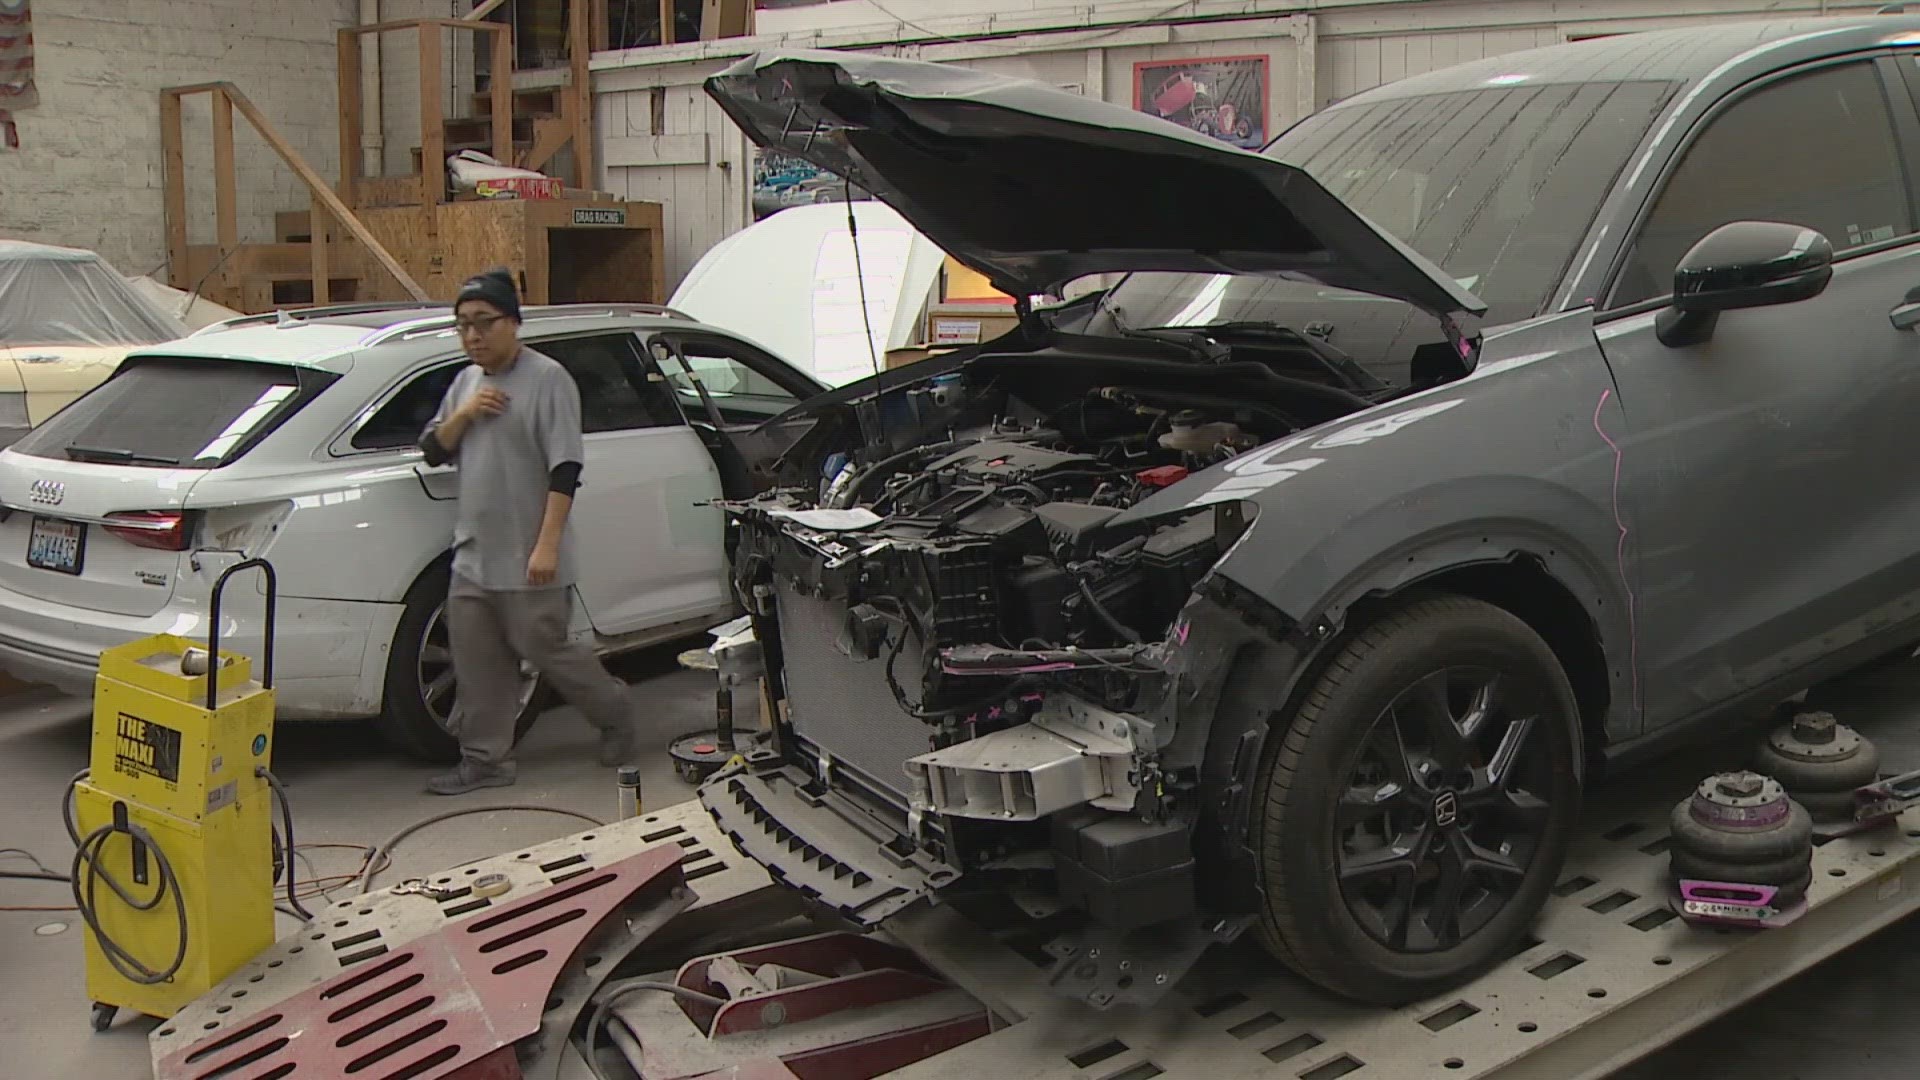 Washington state officials say the two main reasons car insurance premiums are increasing are due to a rise in car repair costs and crashes.